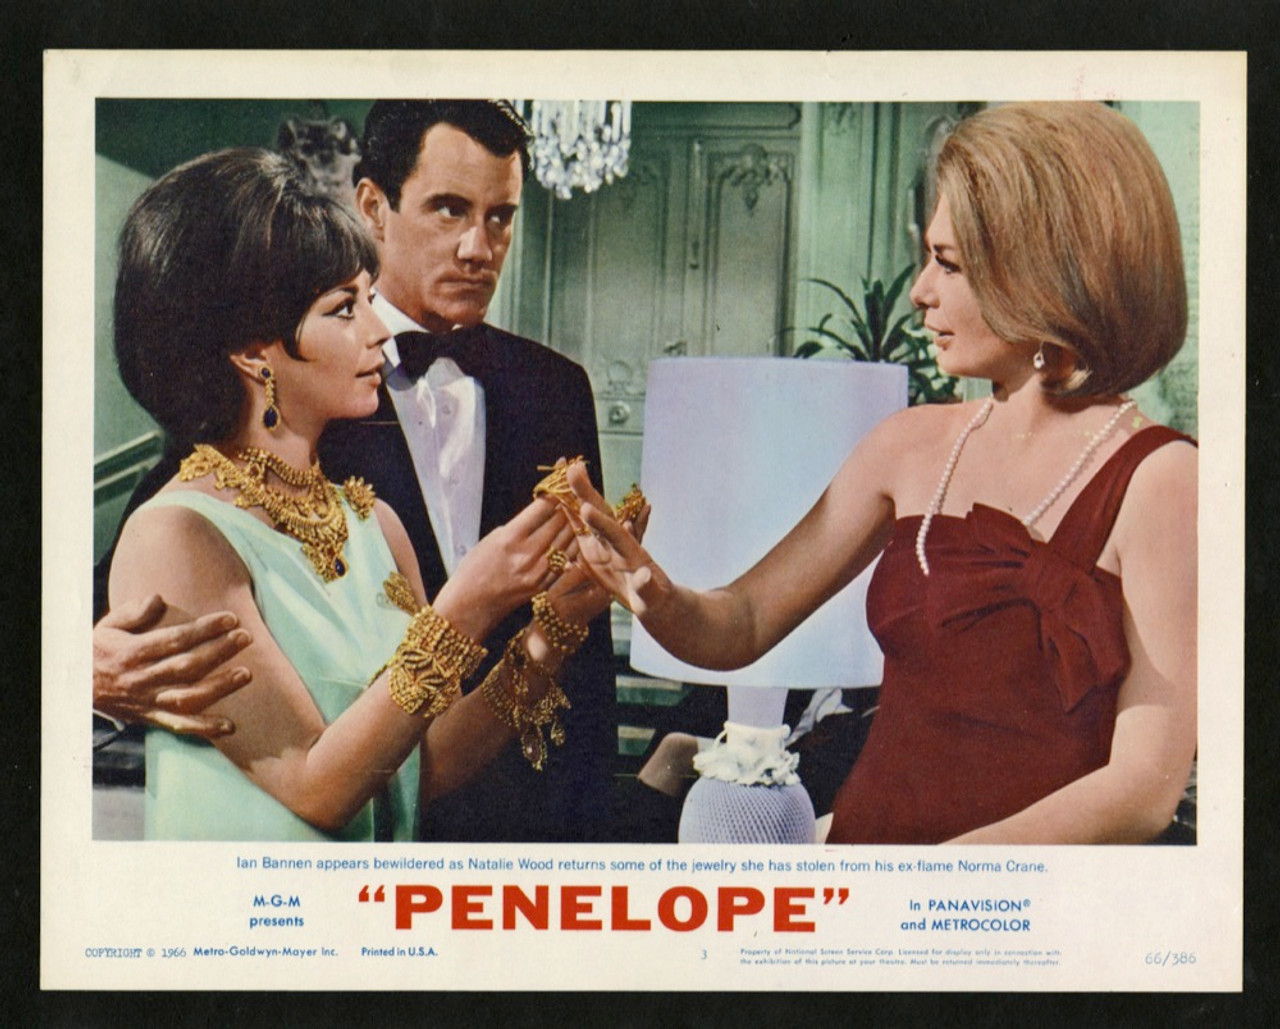 Natalie Wood Porn - Original Penelope (1966) movie poster in NM condition for $35.00